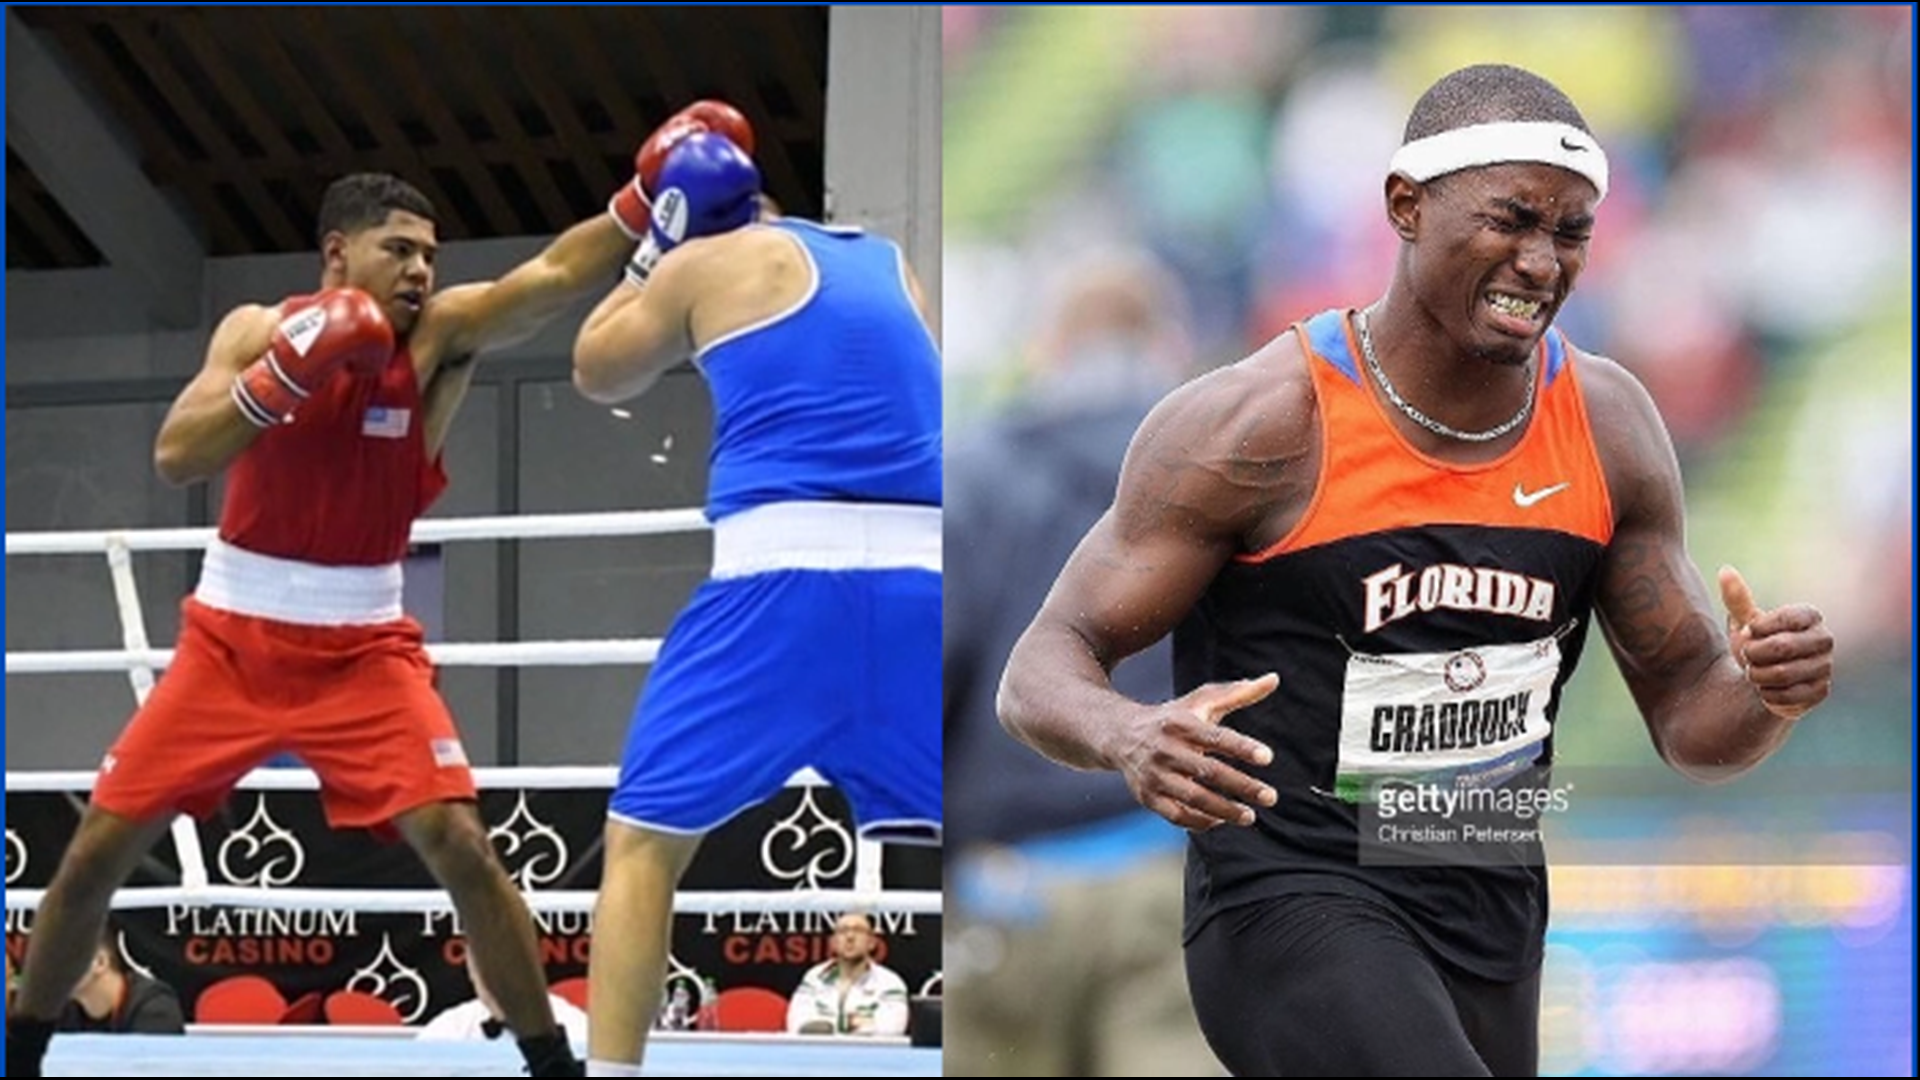 Omar Craddock and Darius Fulghum look to represent the USA together in Tokyo